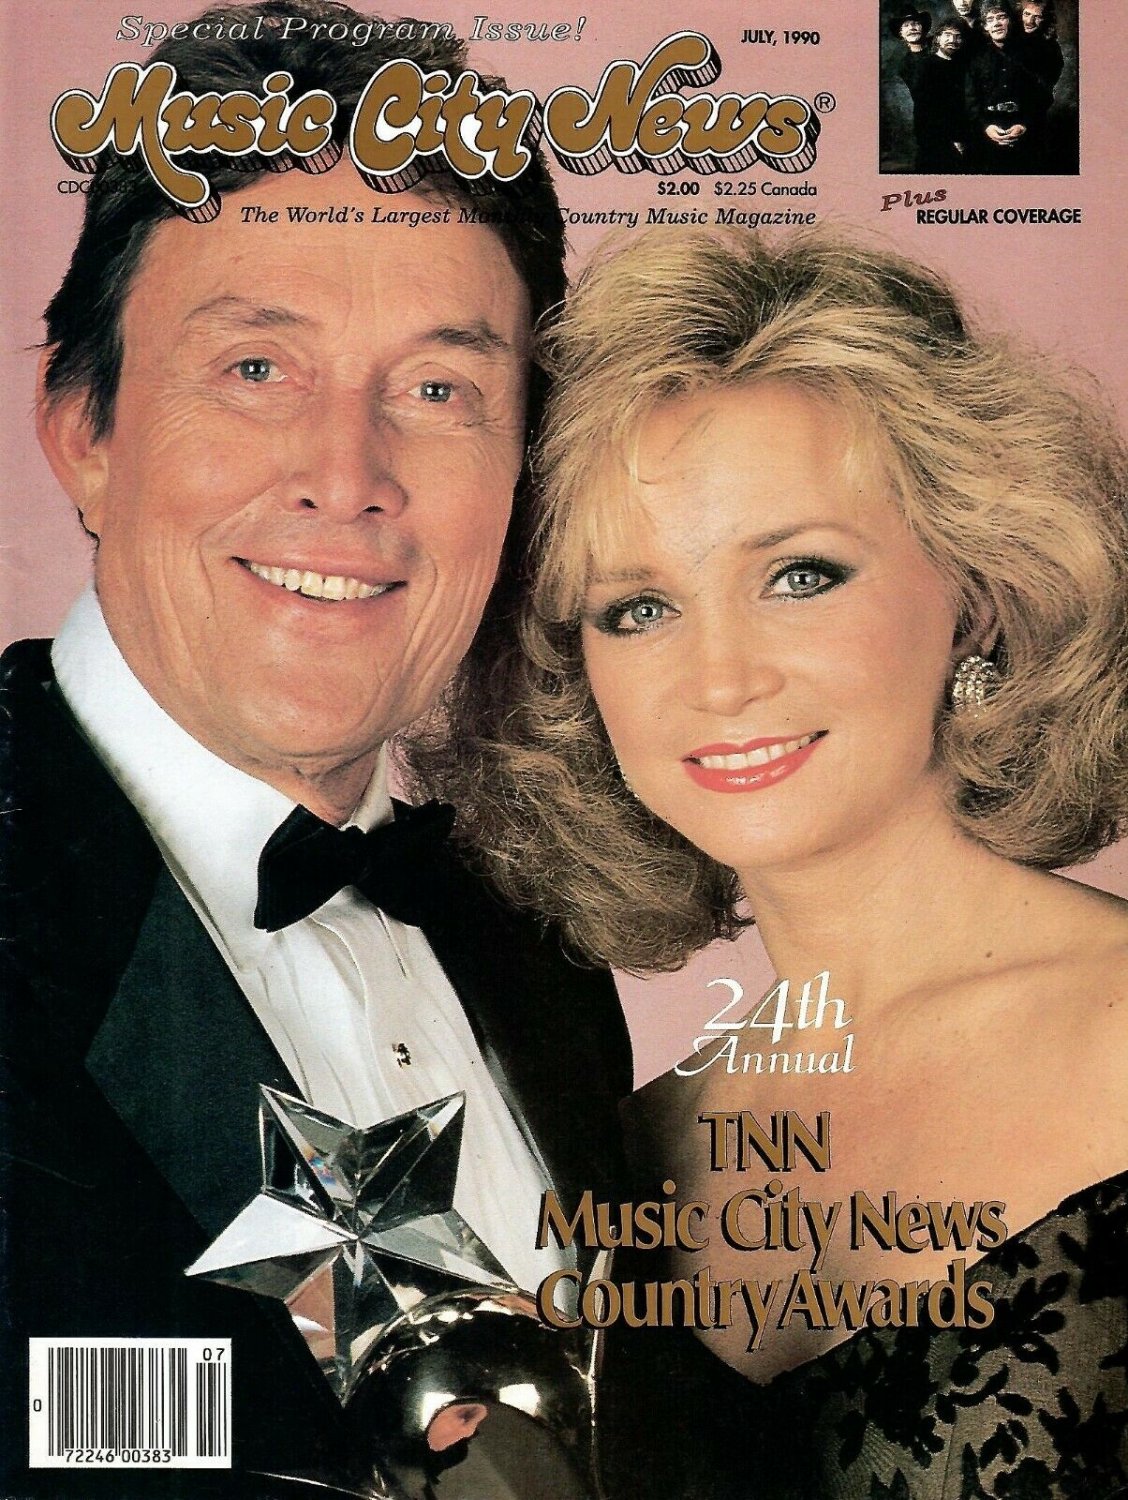 MUSIC CITY NEWS July 1990 24th Annual TNN Music City News Country Awards